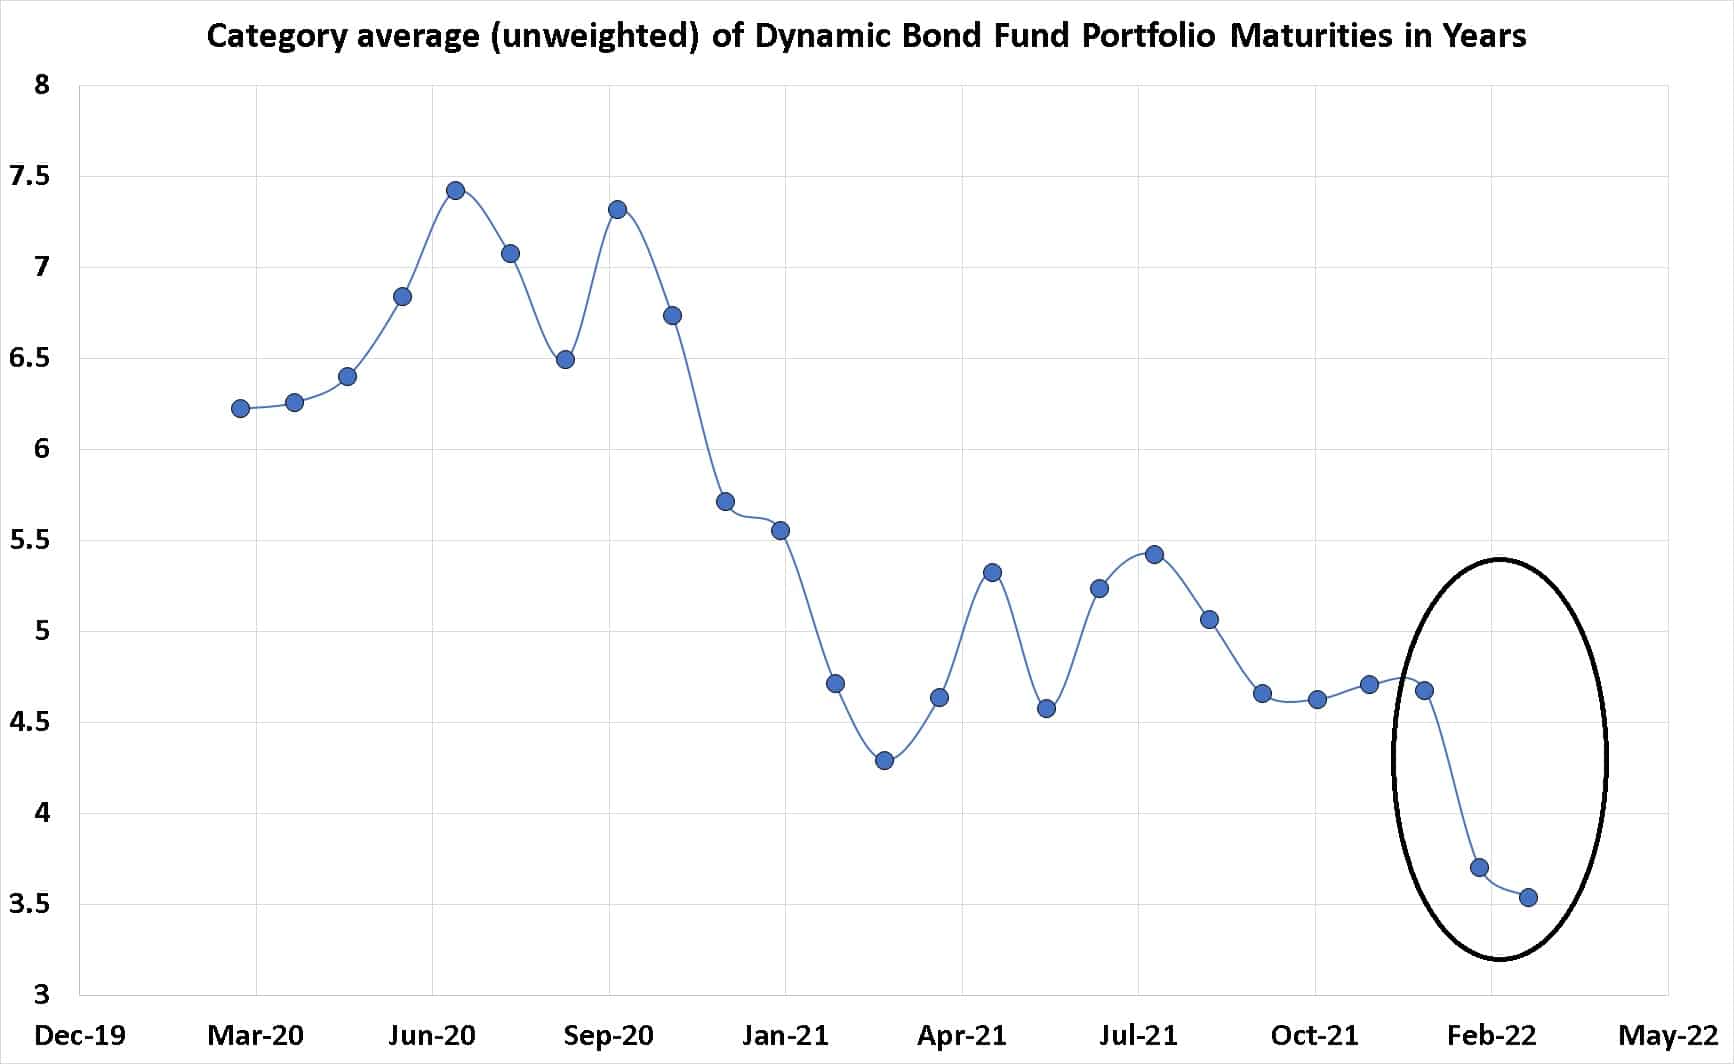 Category average (unweighted) of Dynamic Bond Fund Portfolio Maturities in Years with recent drop corresponding to yield hike shown in the oval